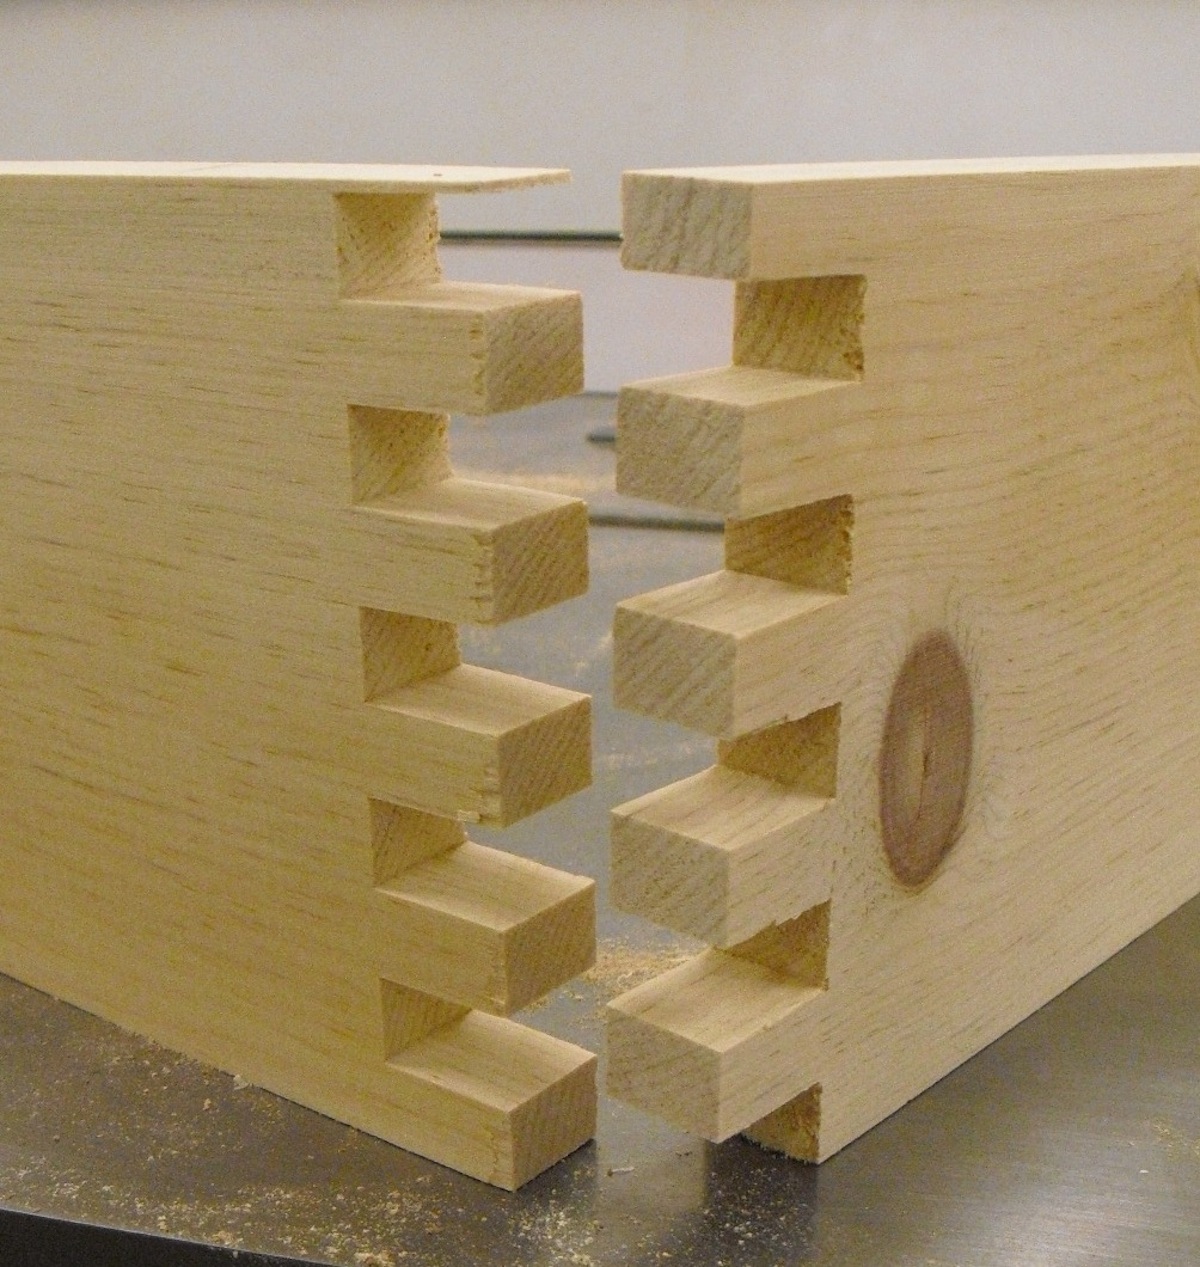 Wood Joints Let's talk wood: box joints on